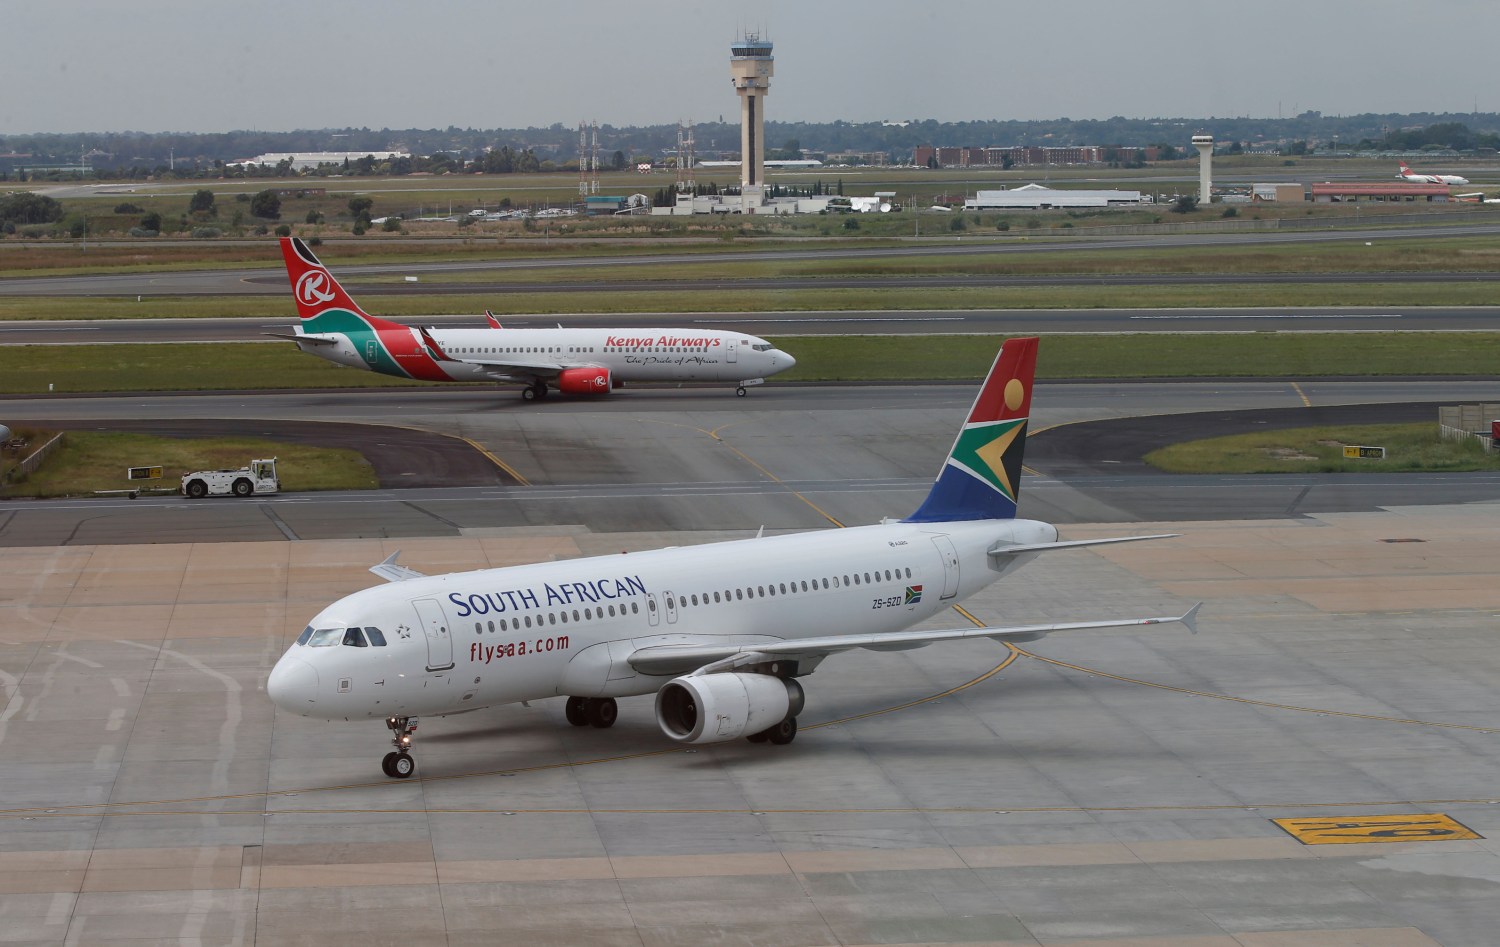 FILE PHOTO: A South African Airways Airbus A320-200 aircraft (bottom) arrives as a Kenya Airways Boeing 737-800 aircraft prepares to take off at the OR Tambo International Airport in Johannesburg, South Africa, March 8, 2017. REUTERS/Siphiwe Sibeko/File Photo - RC1E35E6C420